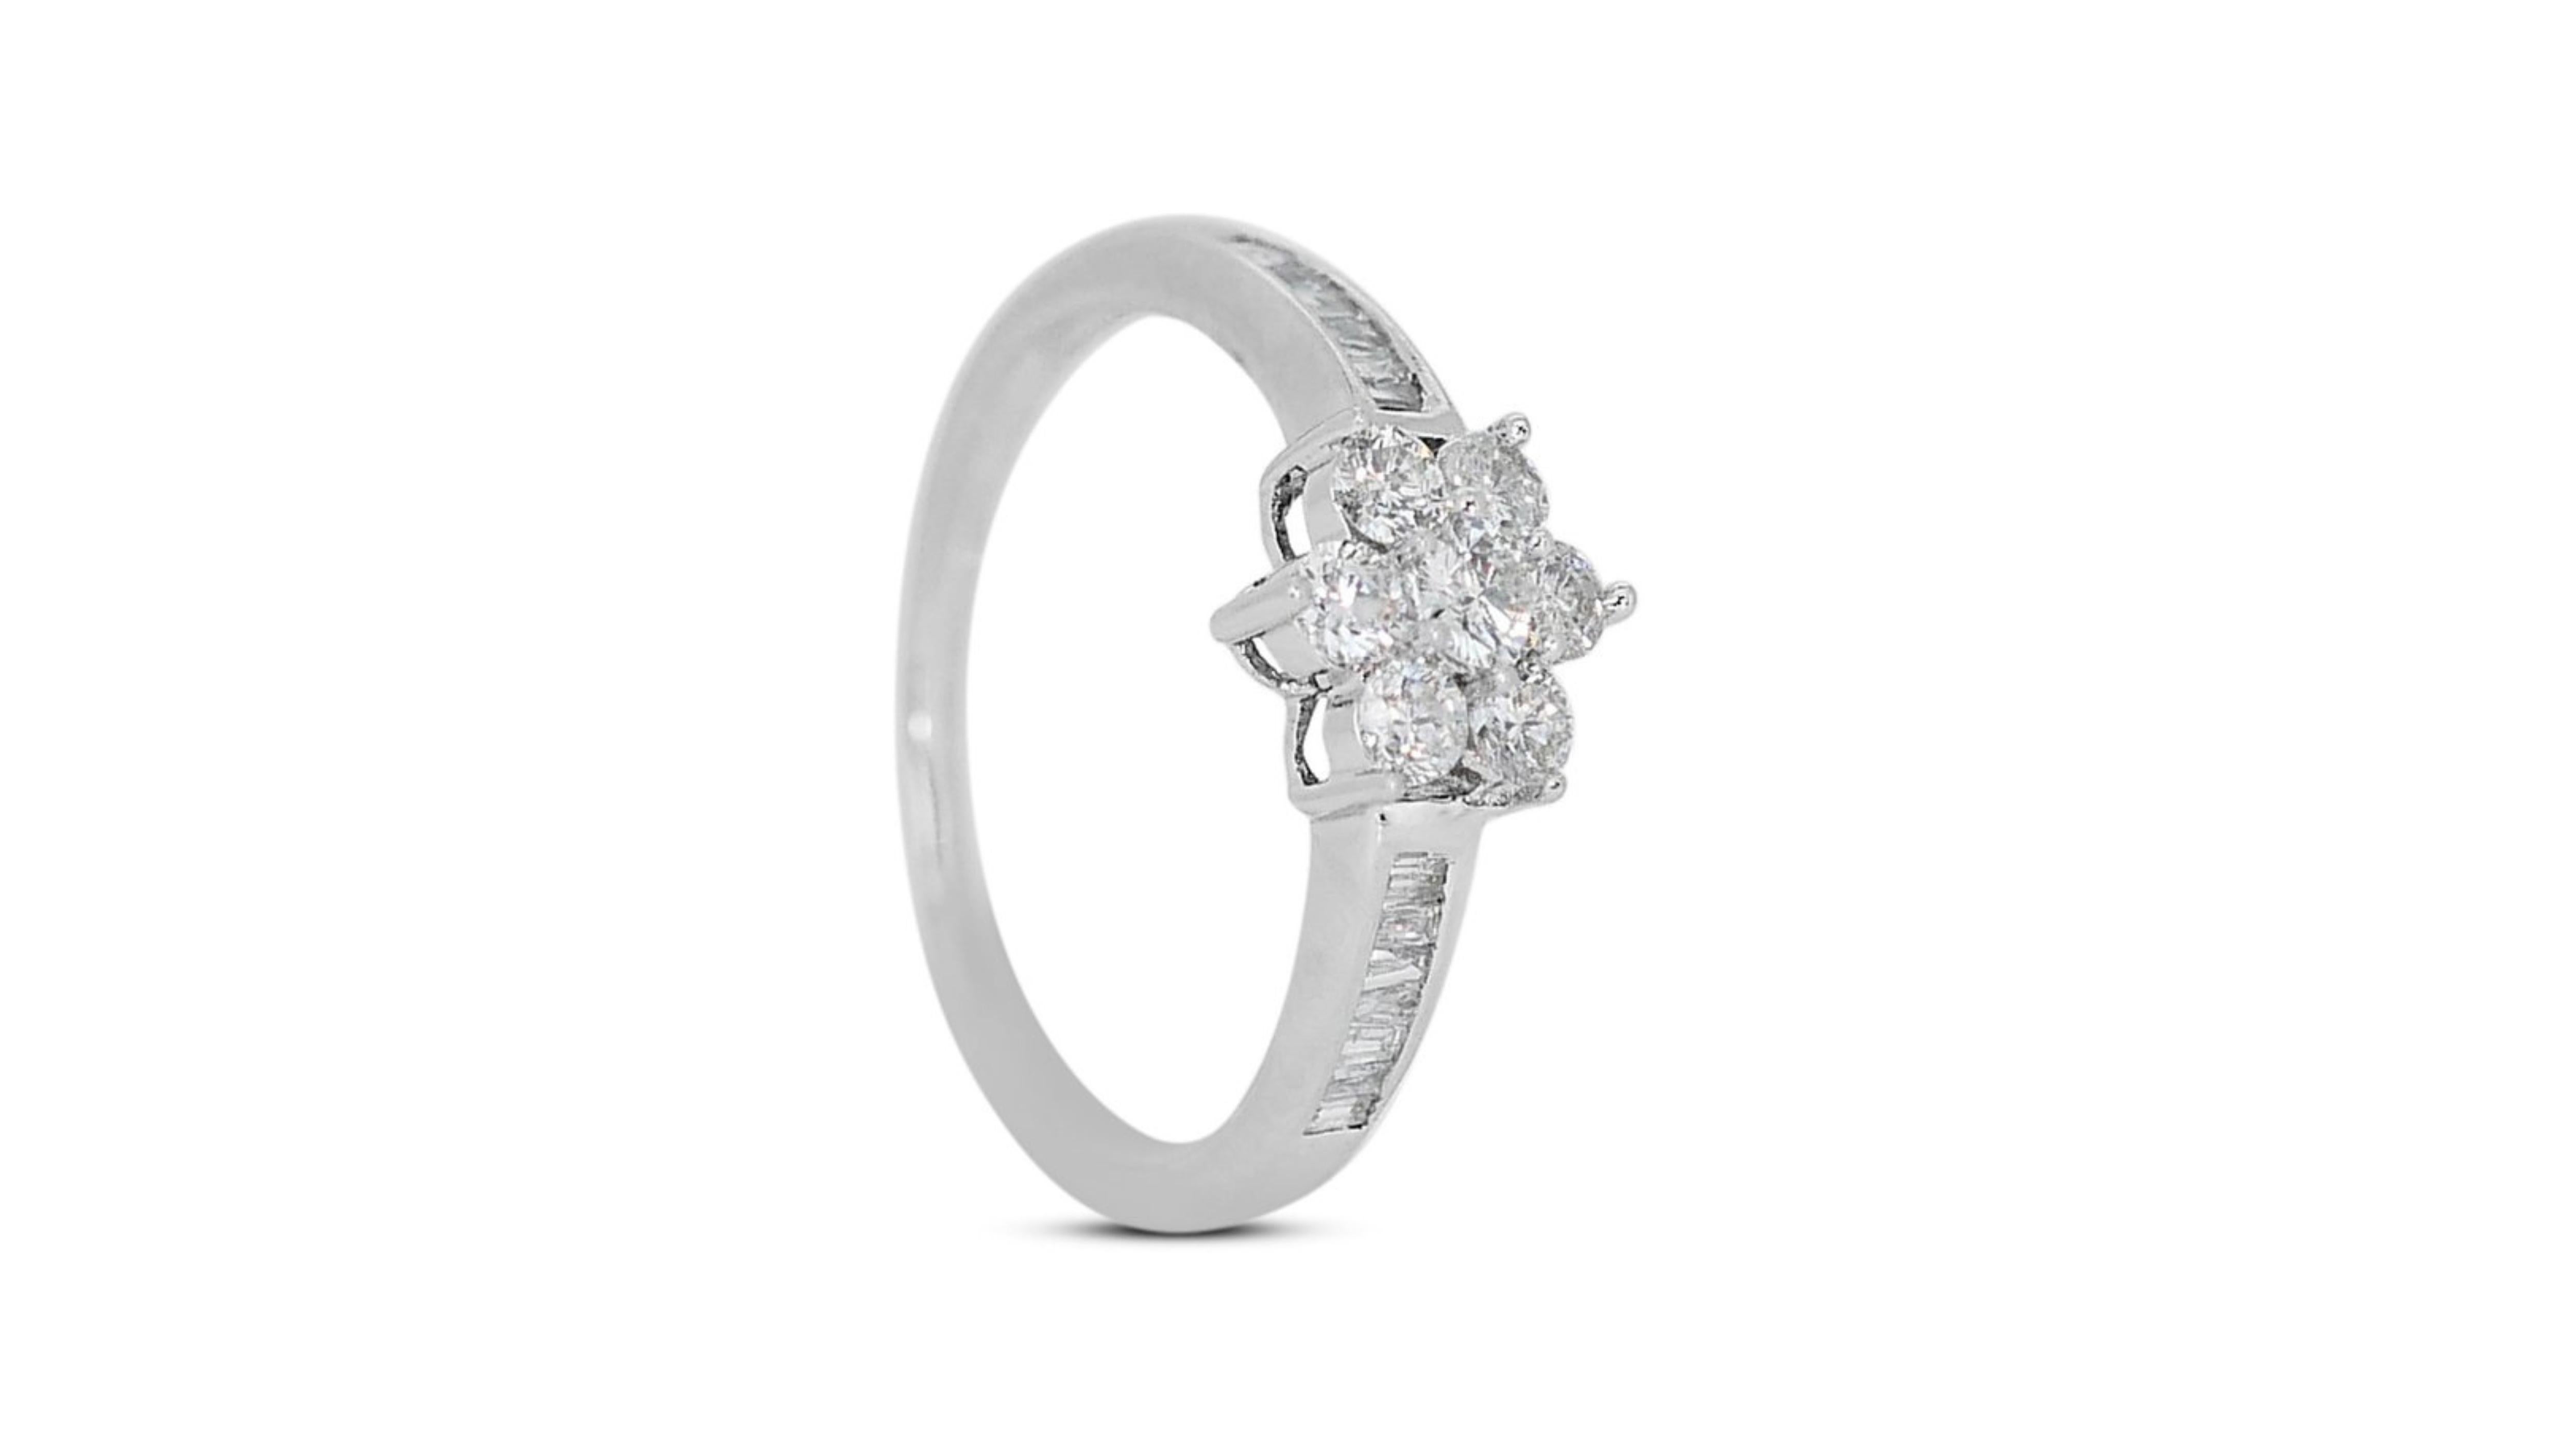 Solitaire 18k White Gold Flower Ring with 2.4 carat Natural Diamond For Sale 2